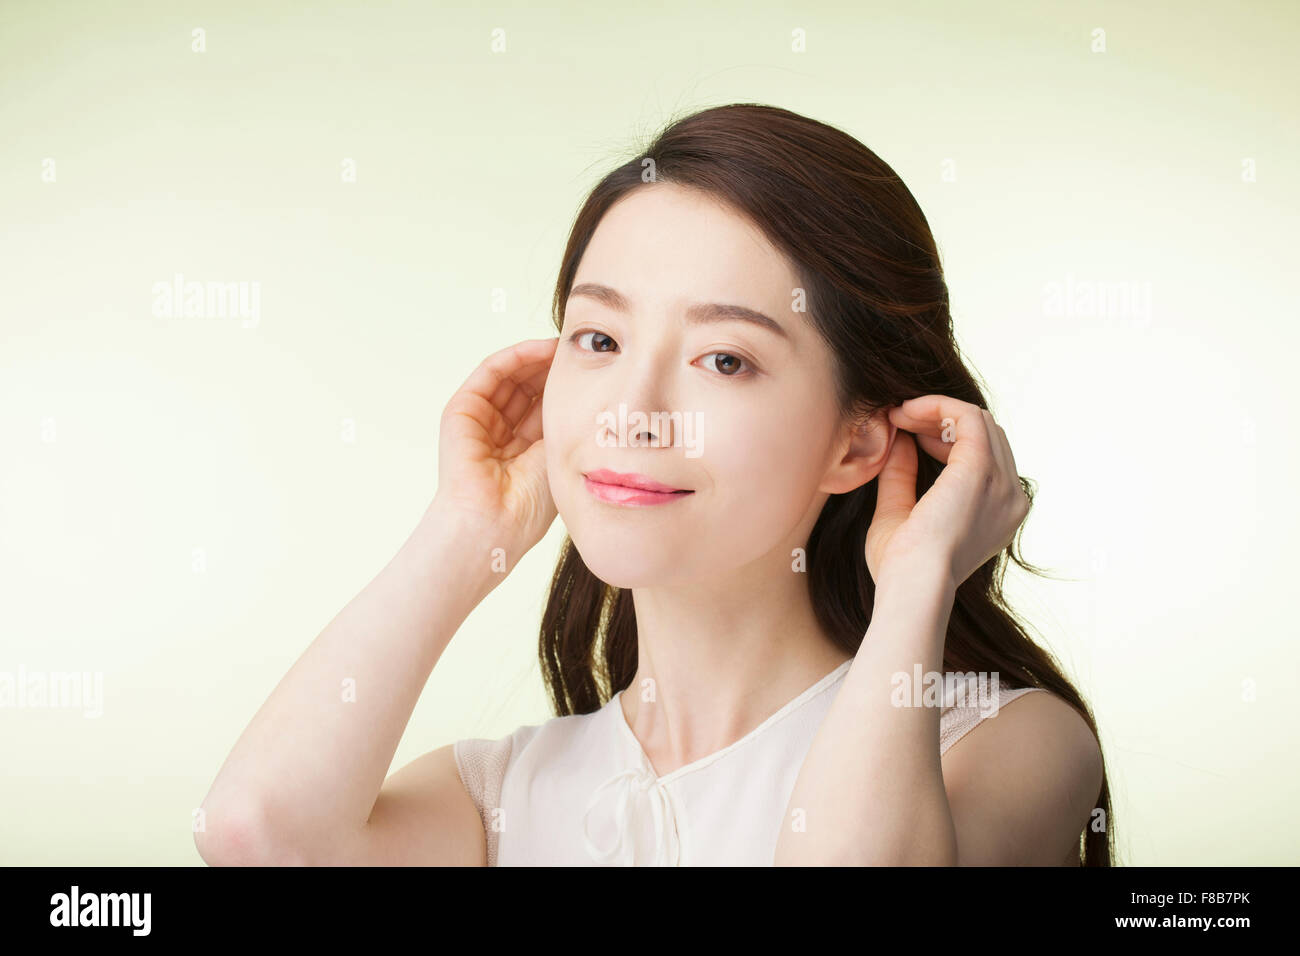 Korean woman with long wavy hair in white sleeveless shirt touching her ears and smiling Stock Photo